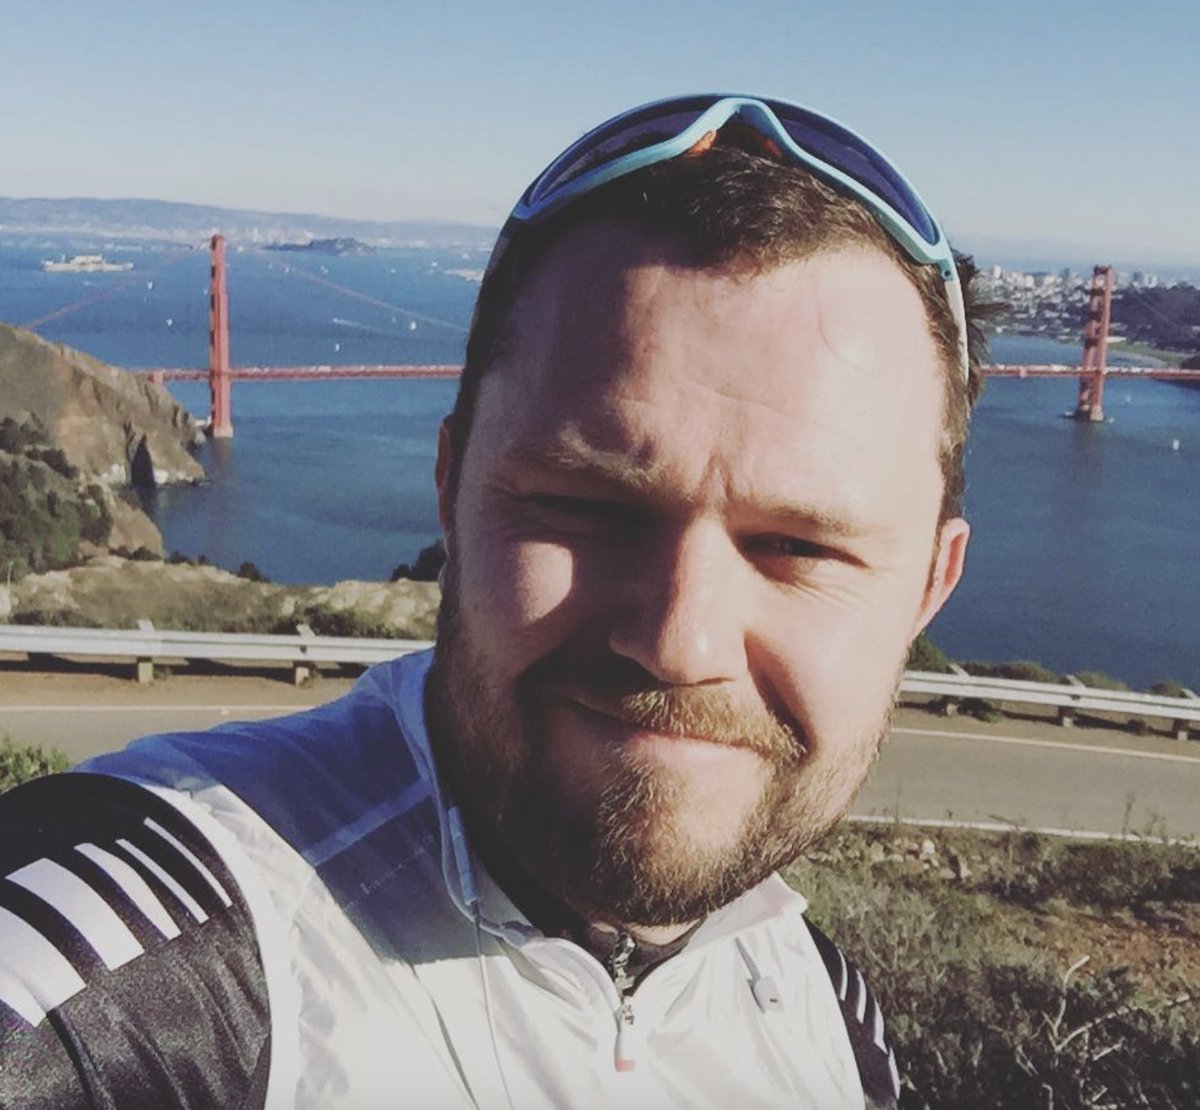 I'm aware our culture is imperiled by the worst kind of structural problems, and with that in mind I want to take a moment to pay tribute to and contextualize my feelings about the rider who was killed in SF yesterday by someone opening a car door. His name was Devlin O’Connor.